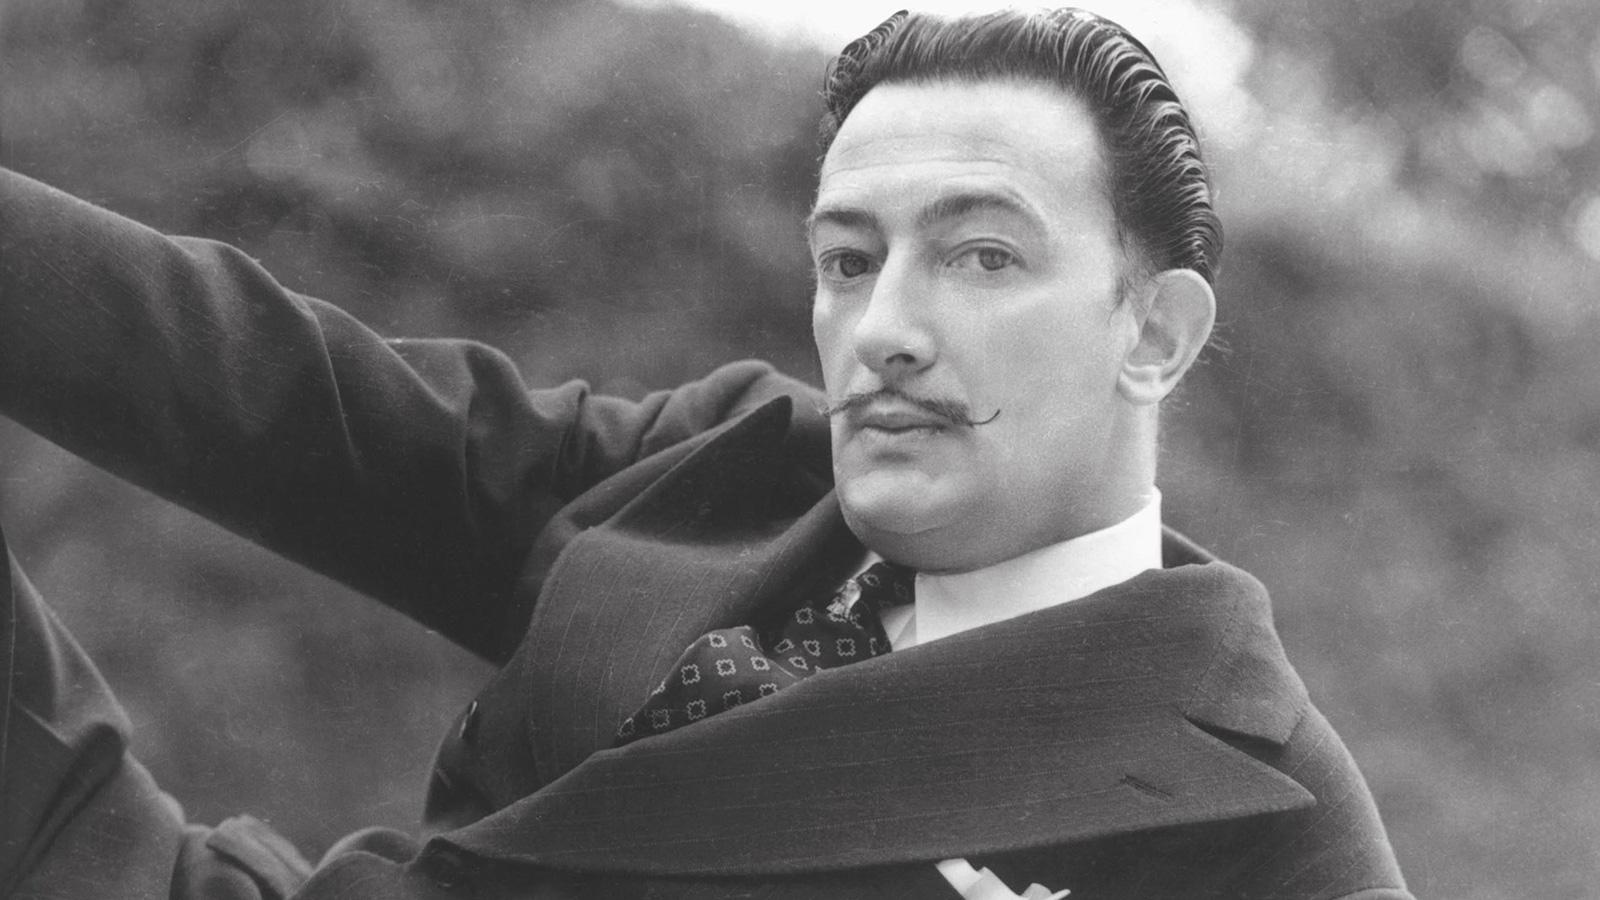 “Salvador Dalí: The Image Disappears,” opened February 18 at the Art Institute of Chicago. (Selznick / United Artists / Shutterstock via CNN)